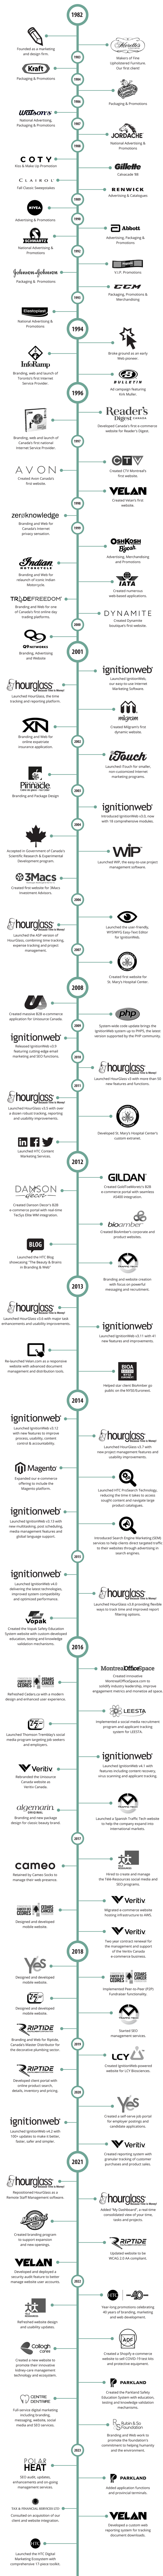 Timeline graphic of HTC's history